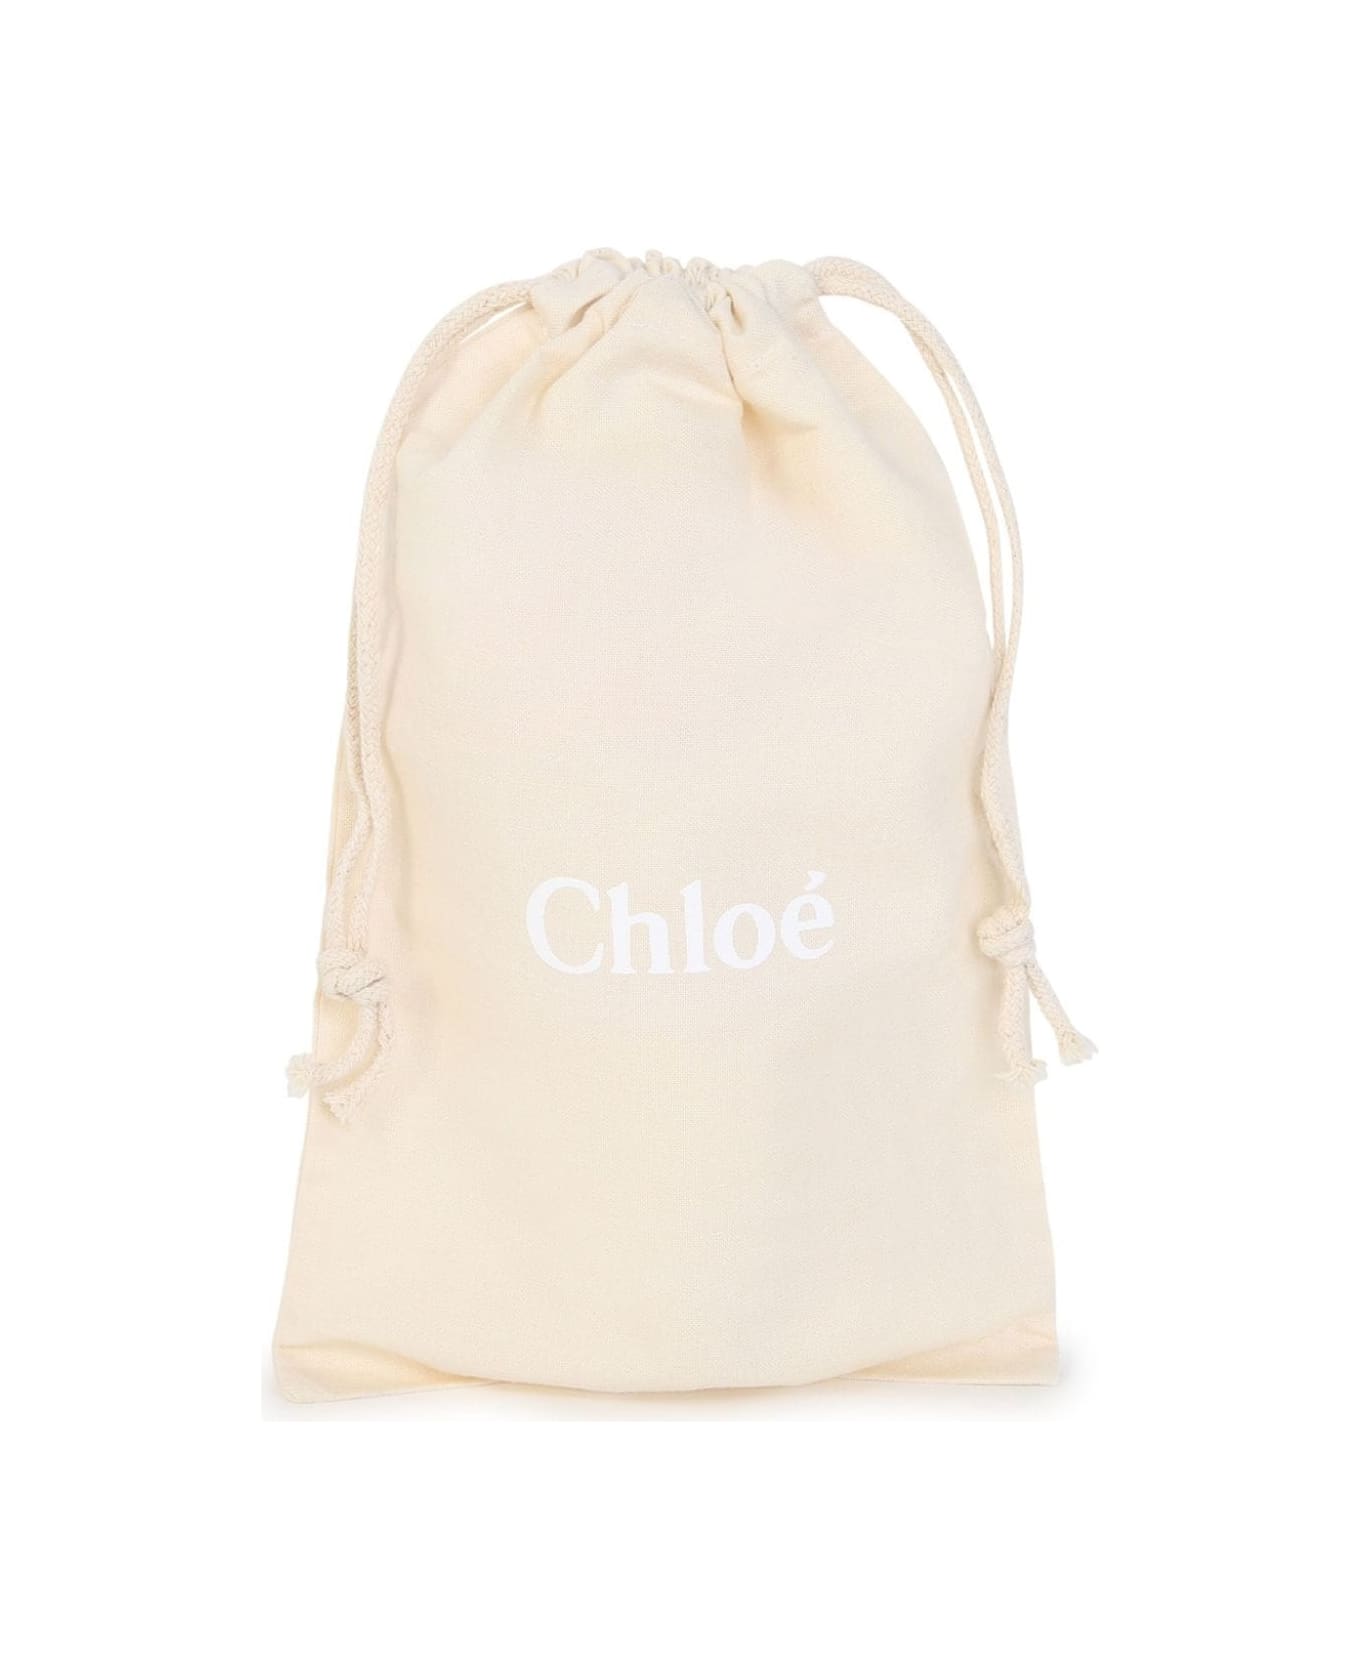 Chloé 210 Ml Baby Bottle In Light Pink With Logo - Pink